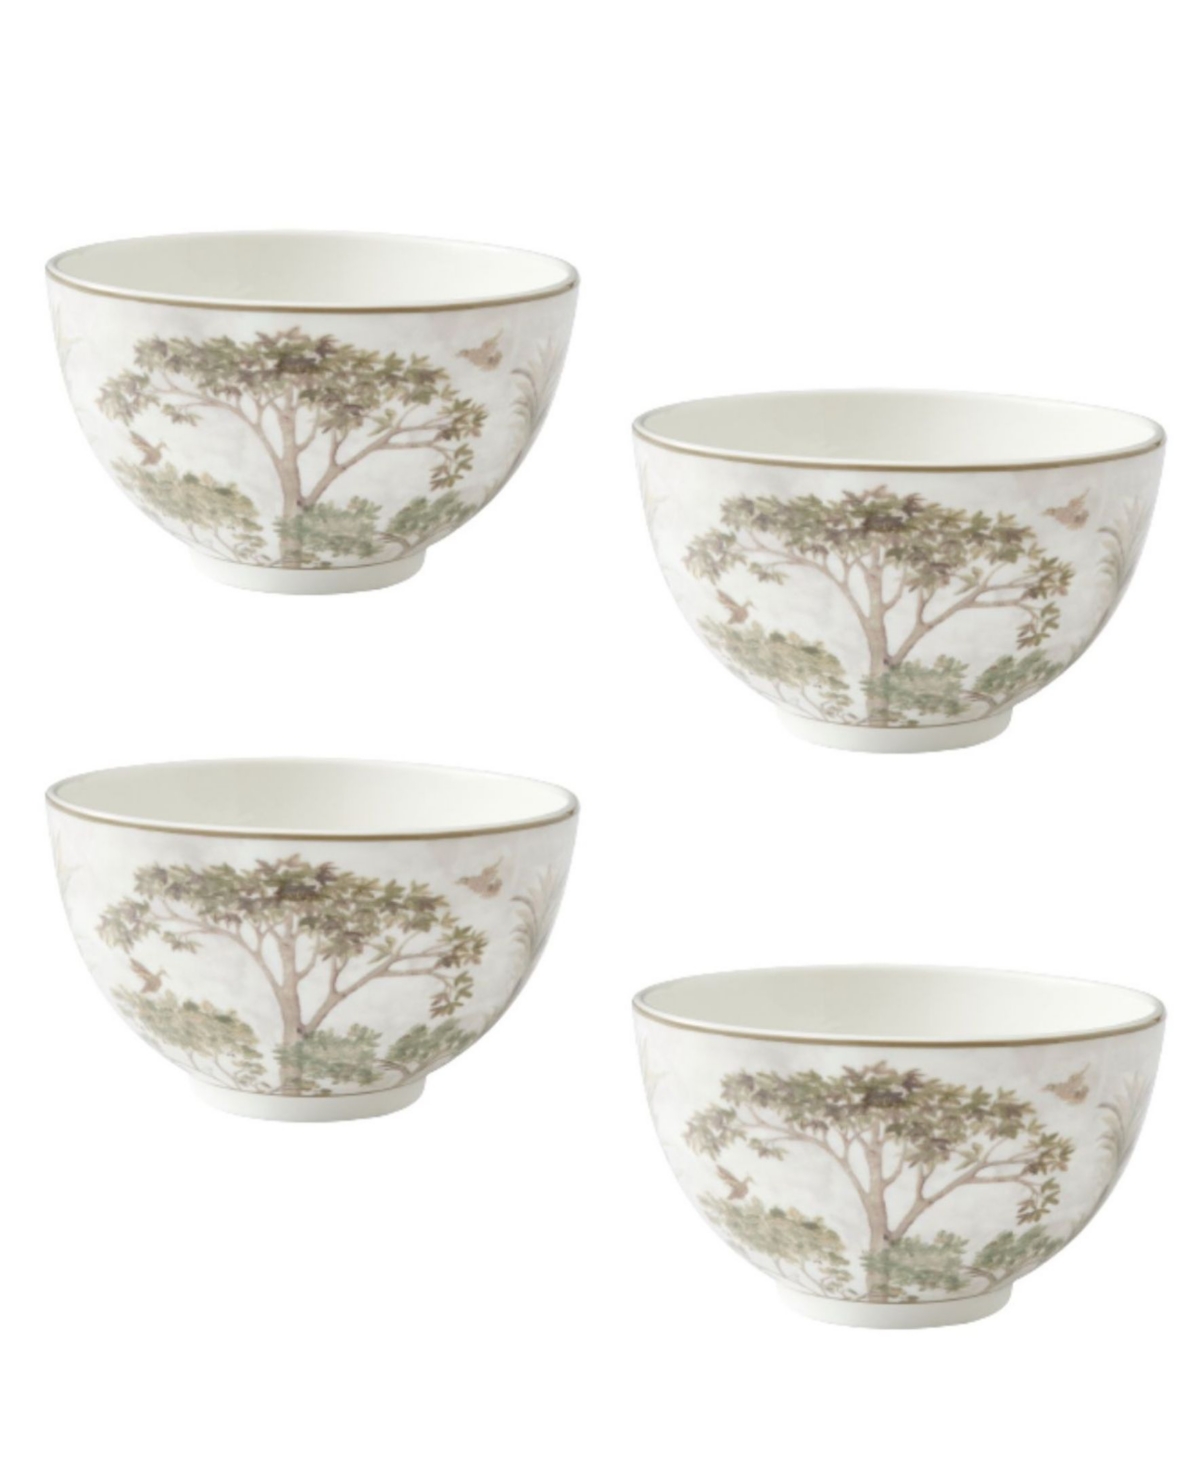 Tall Trees 4 Piece Rice Bowls Set, Service for 4 - Assorted